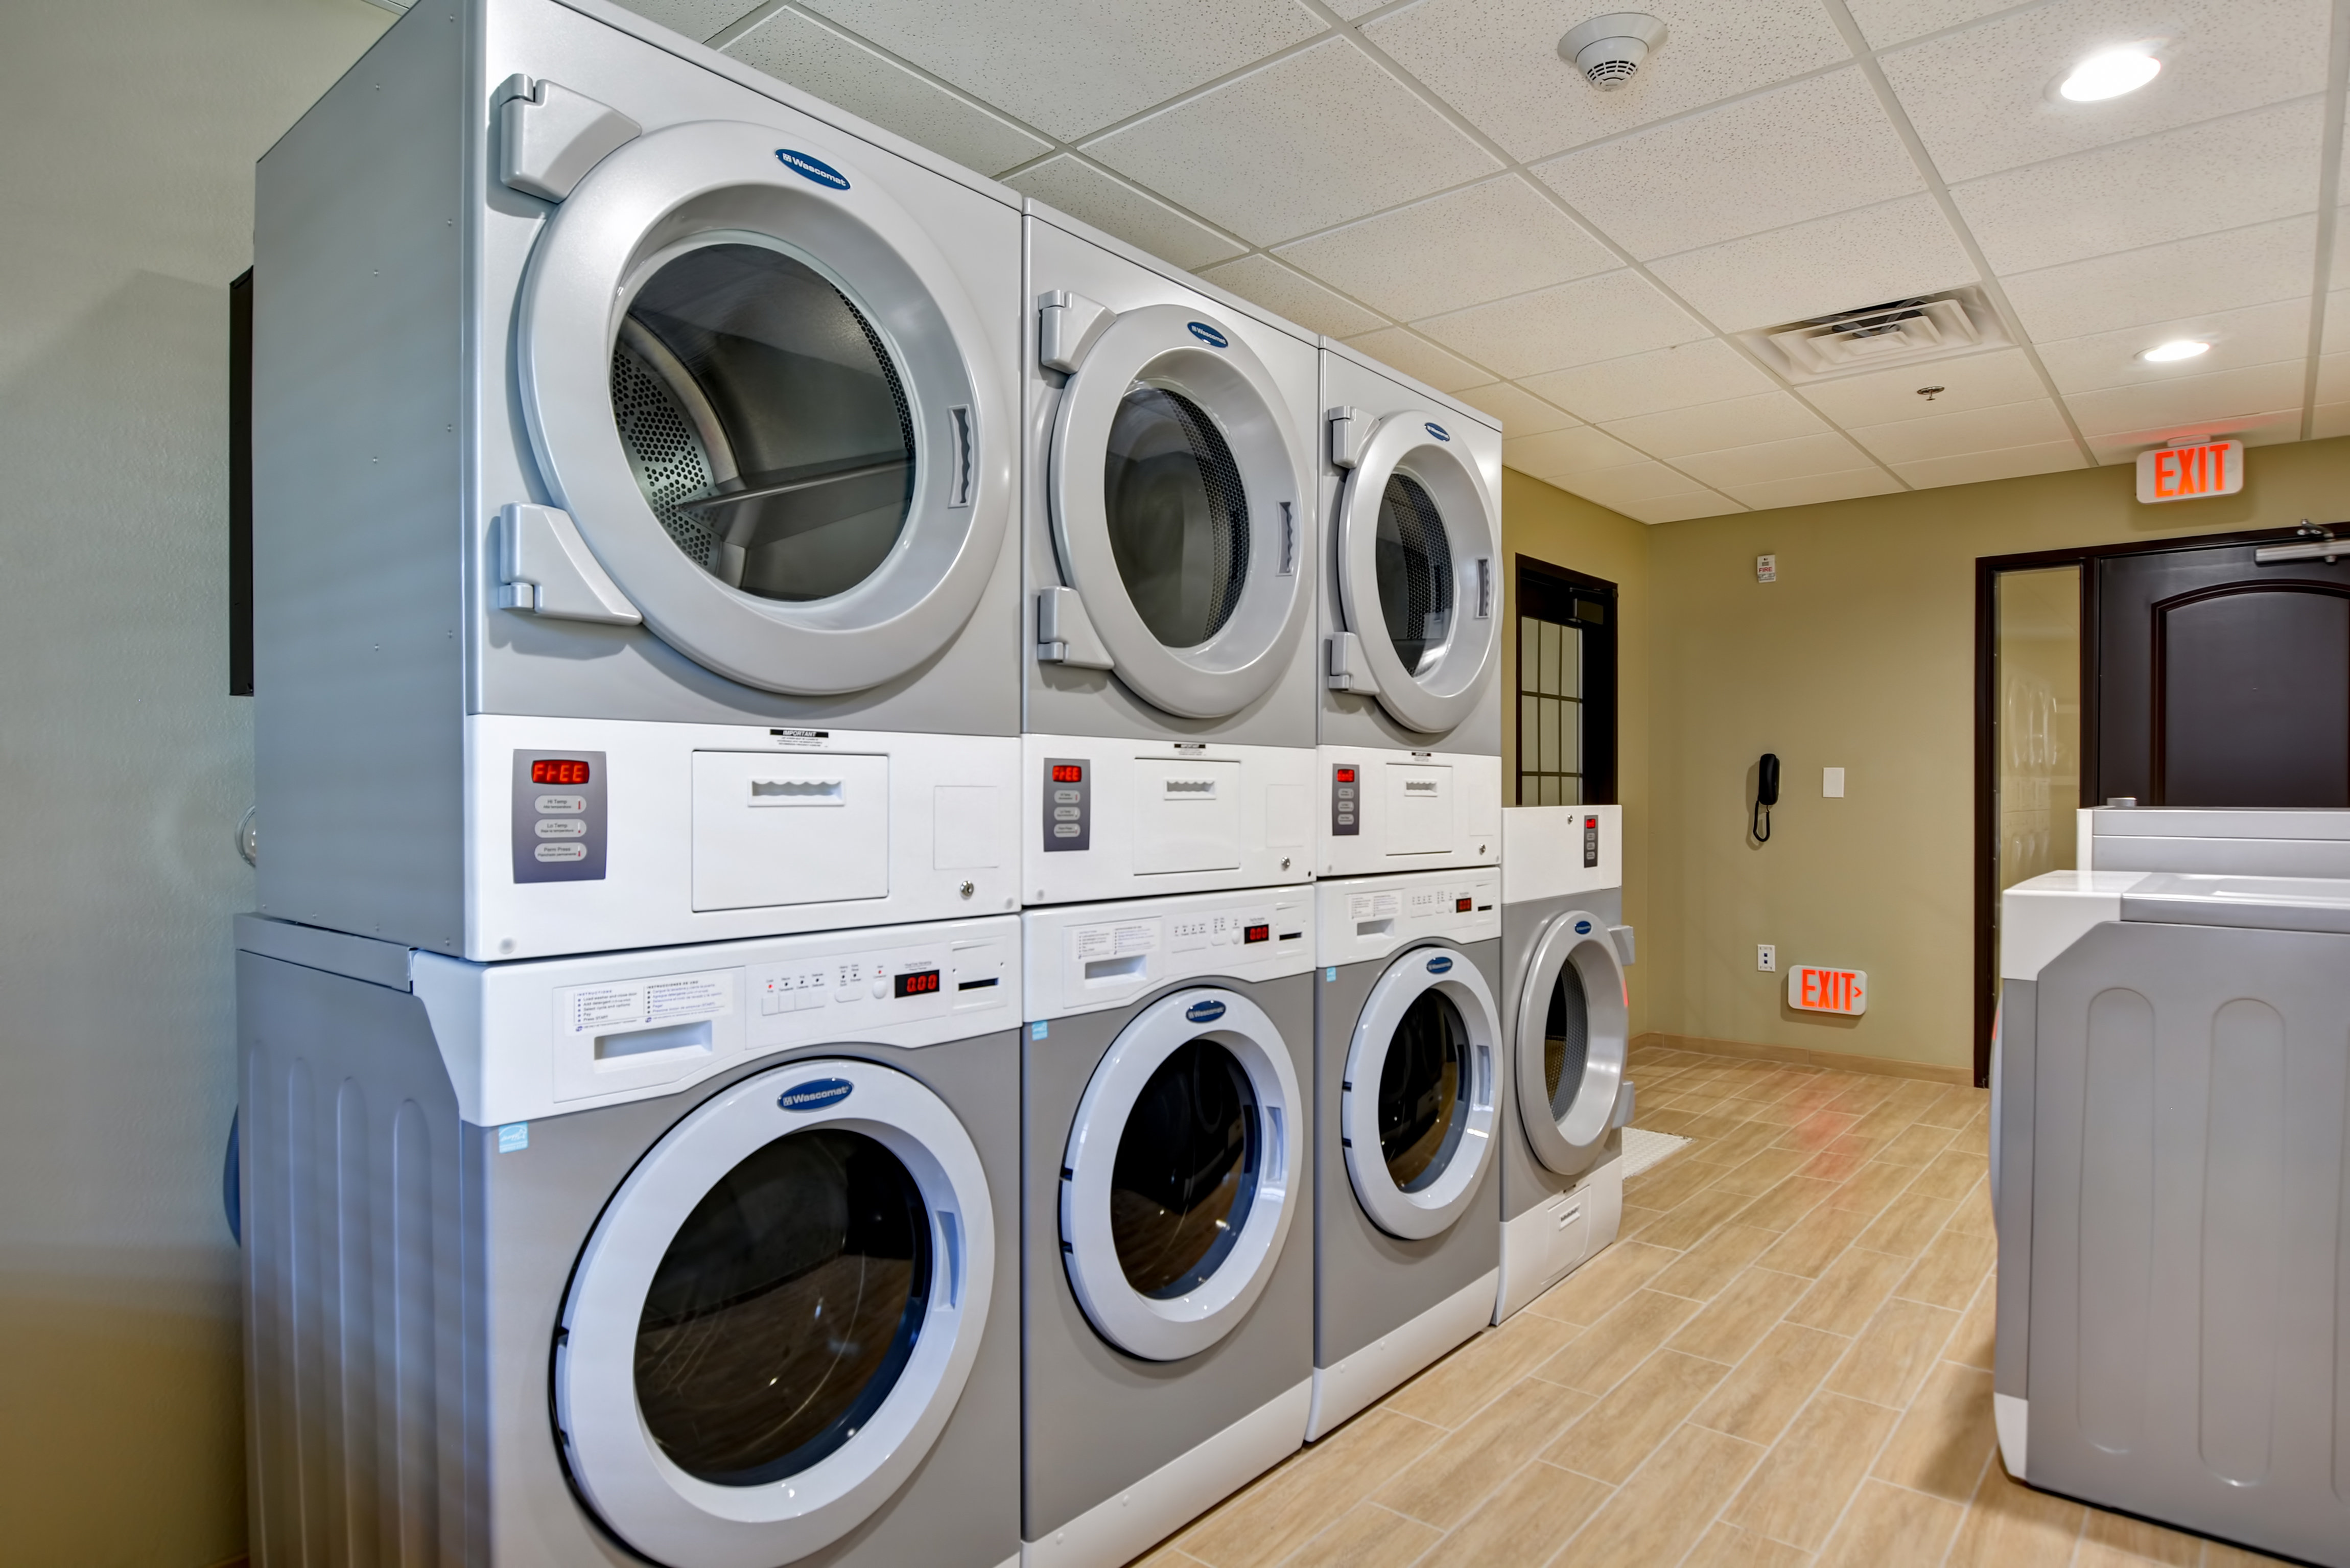 Free laundry service is available 24/7 for guests convenience.